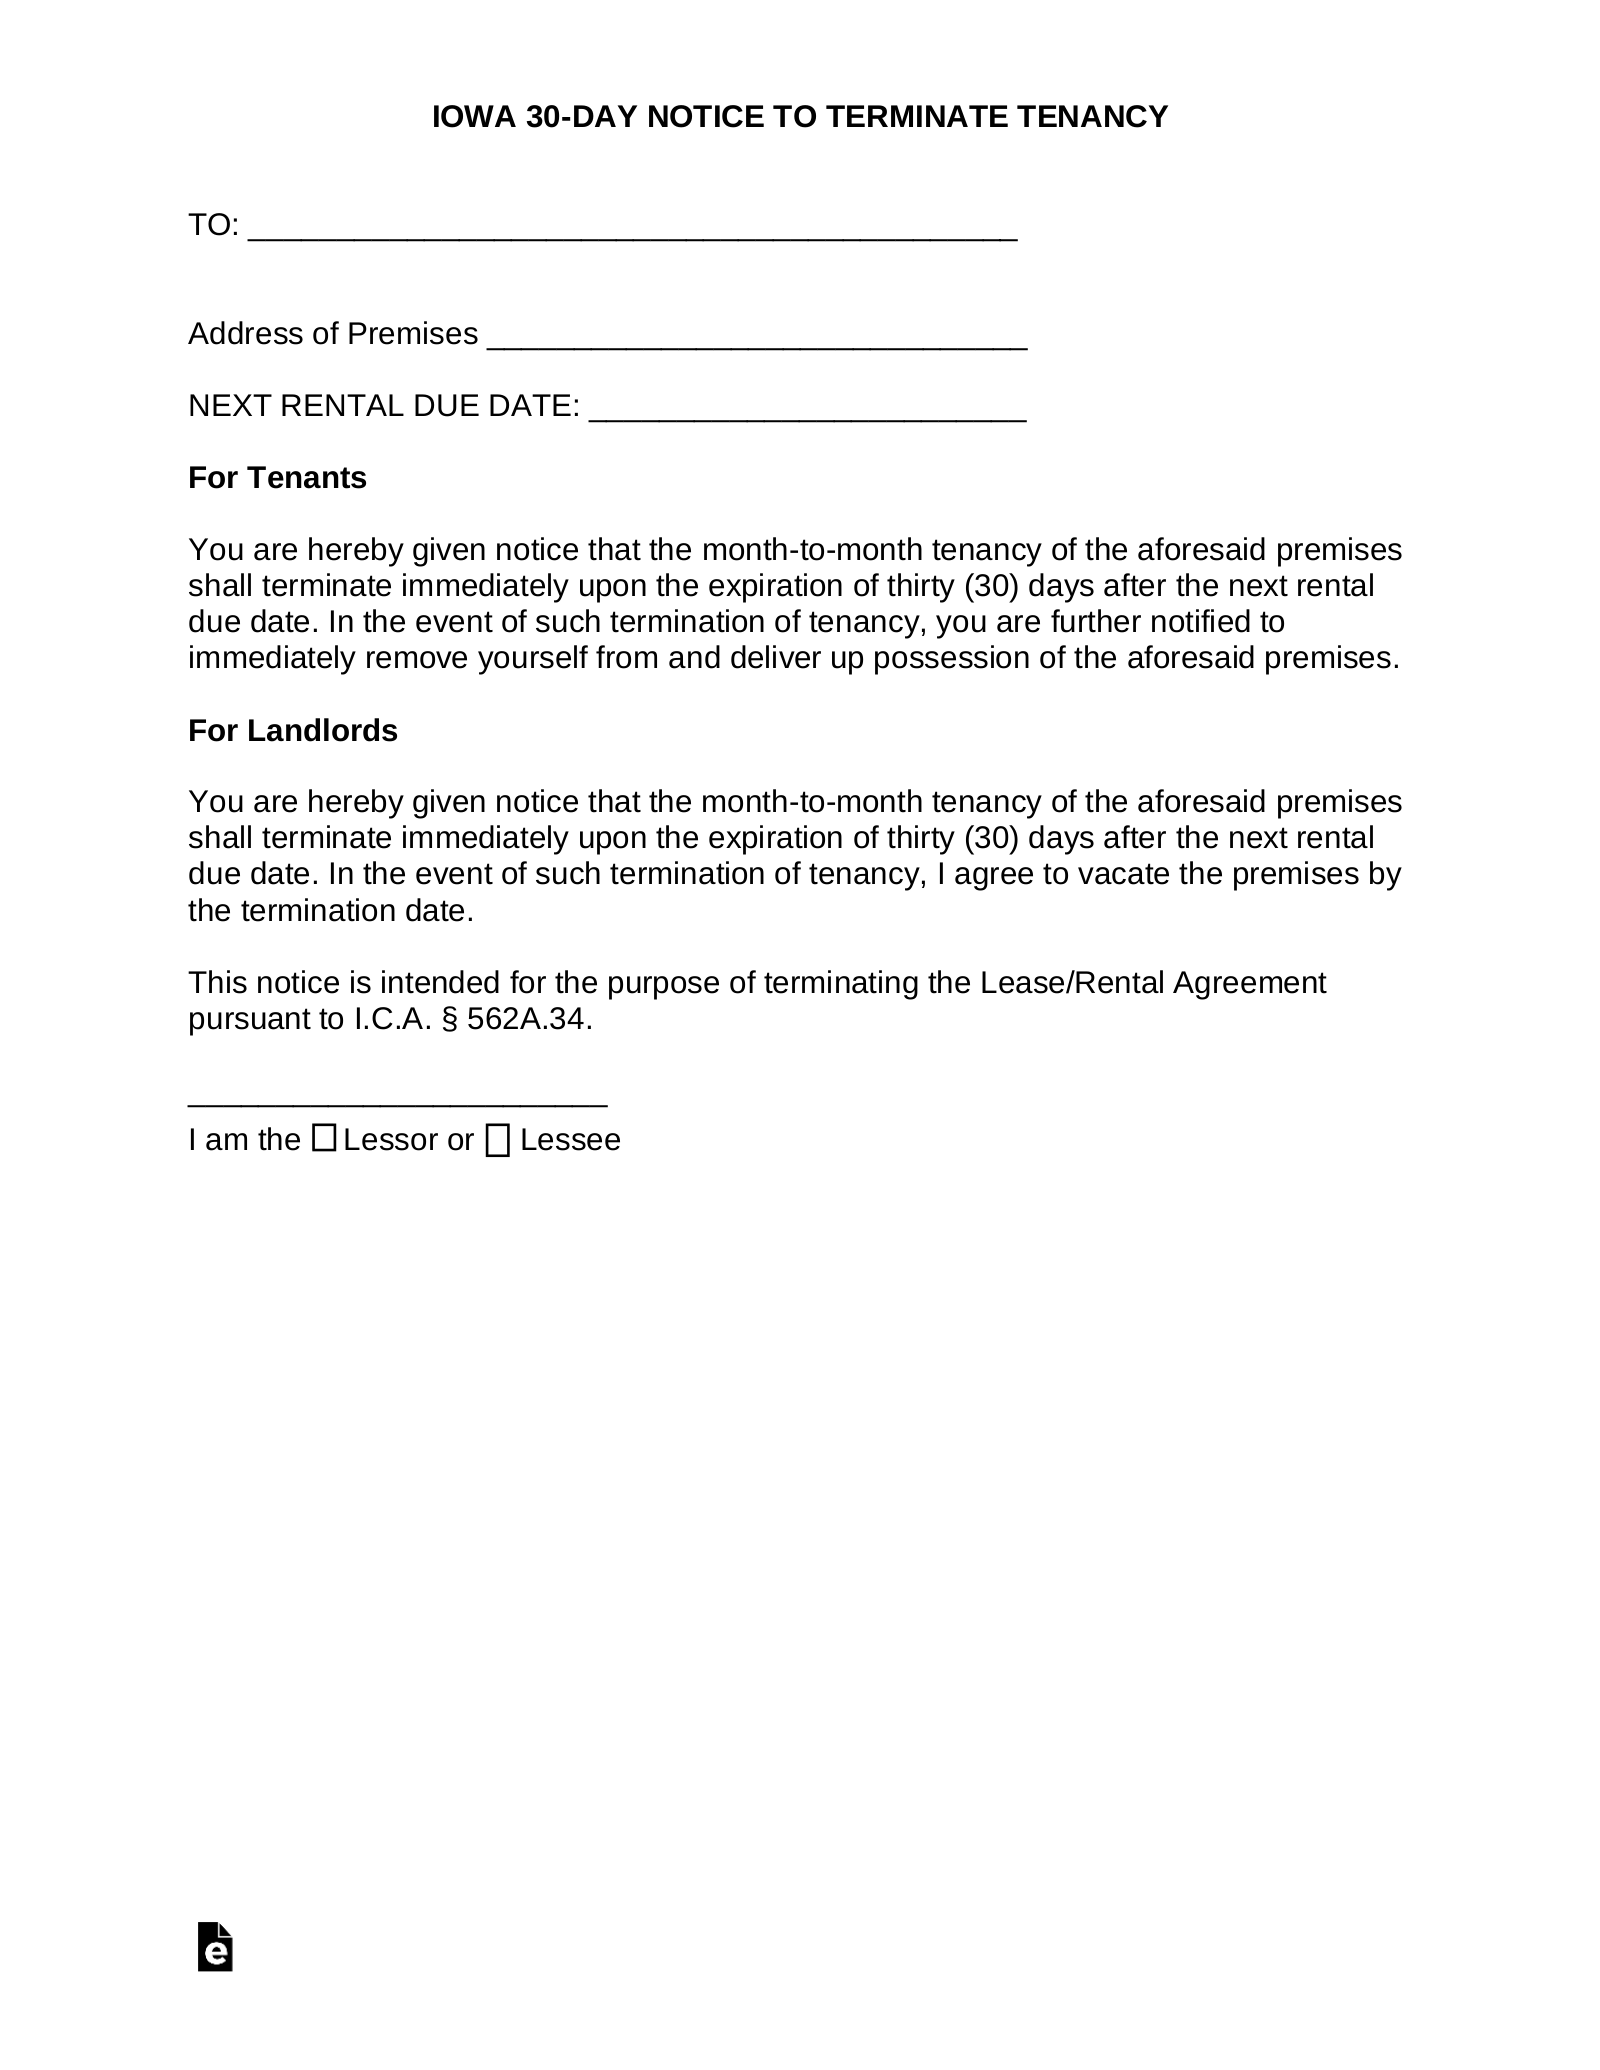 30 Day Lease Termination Letter from eforms.com